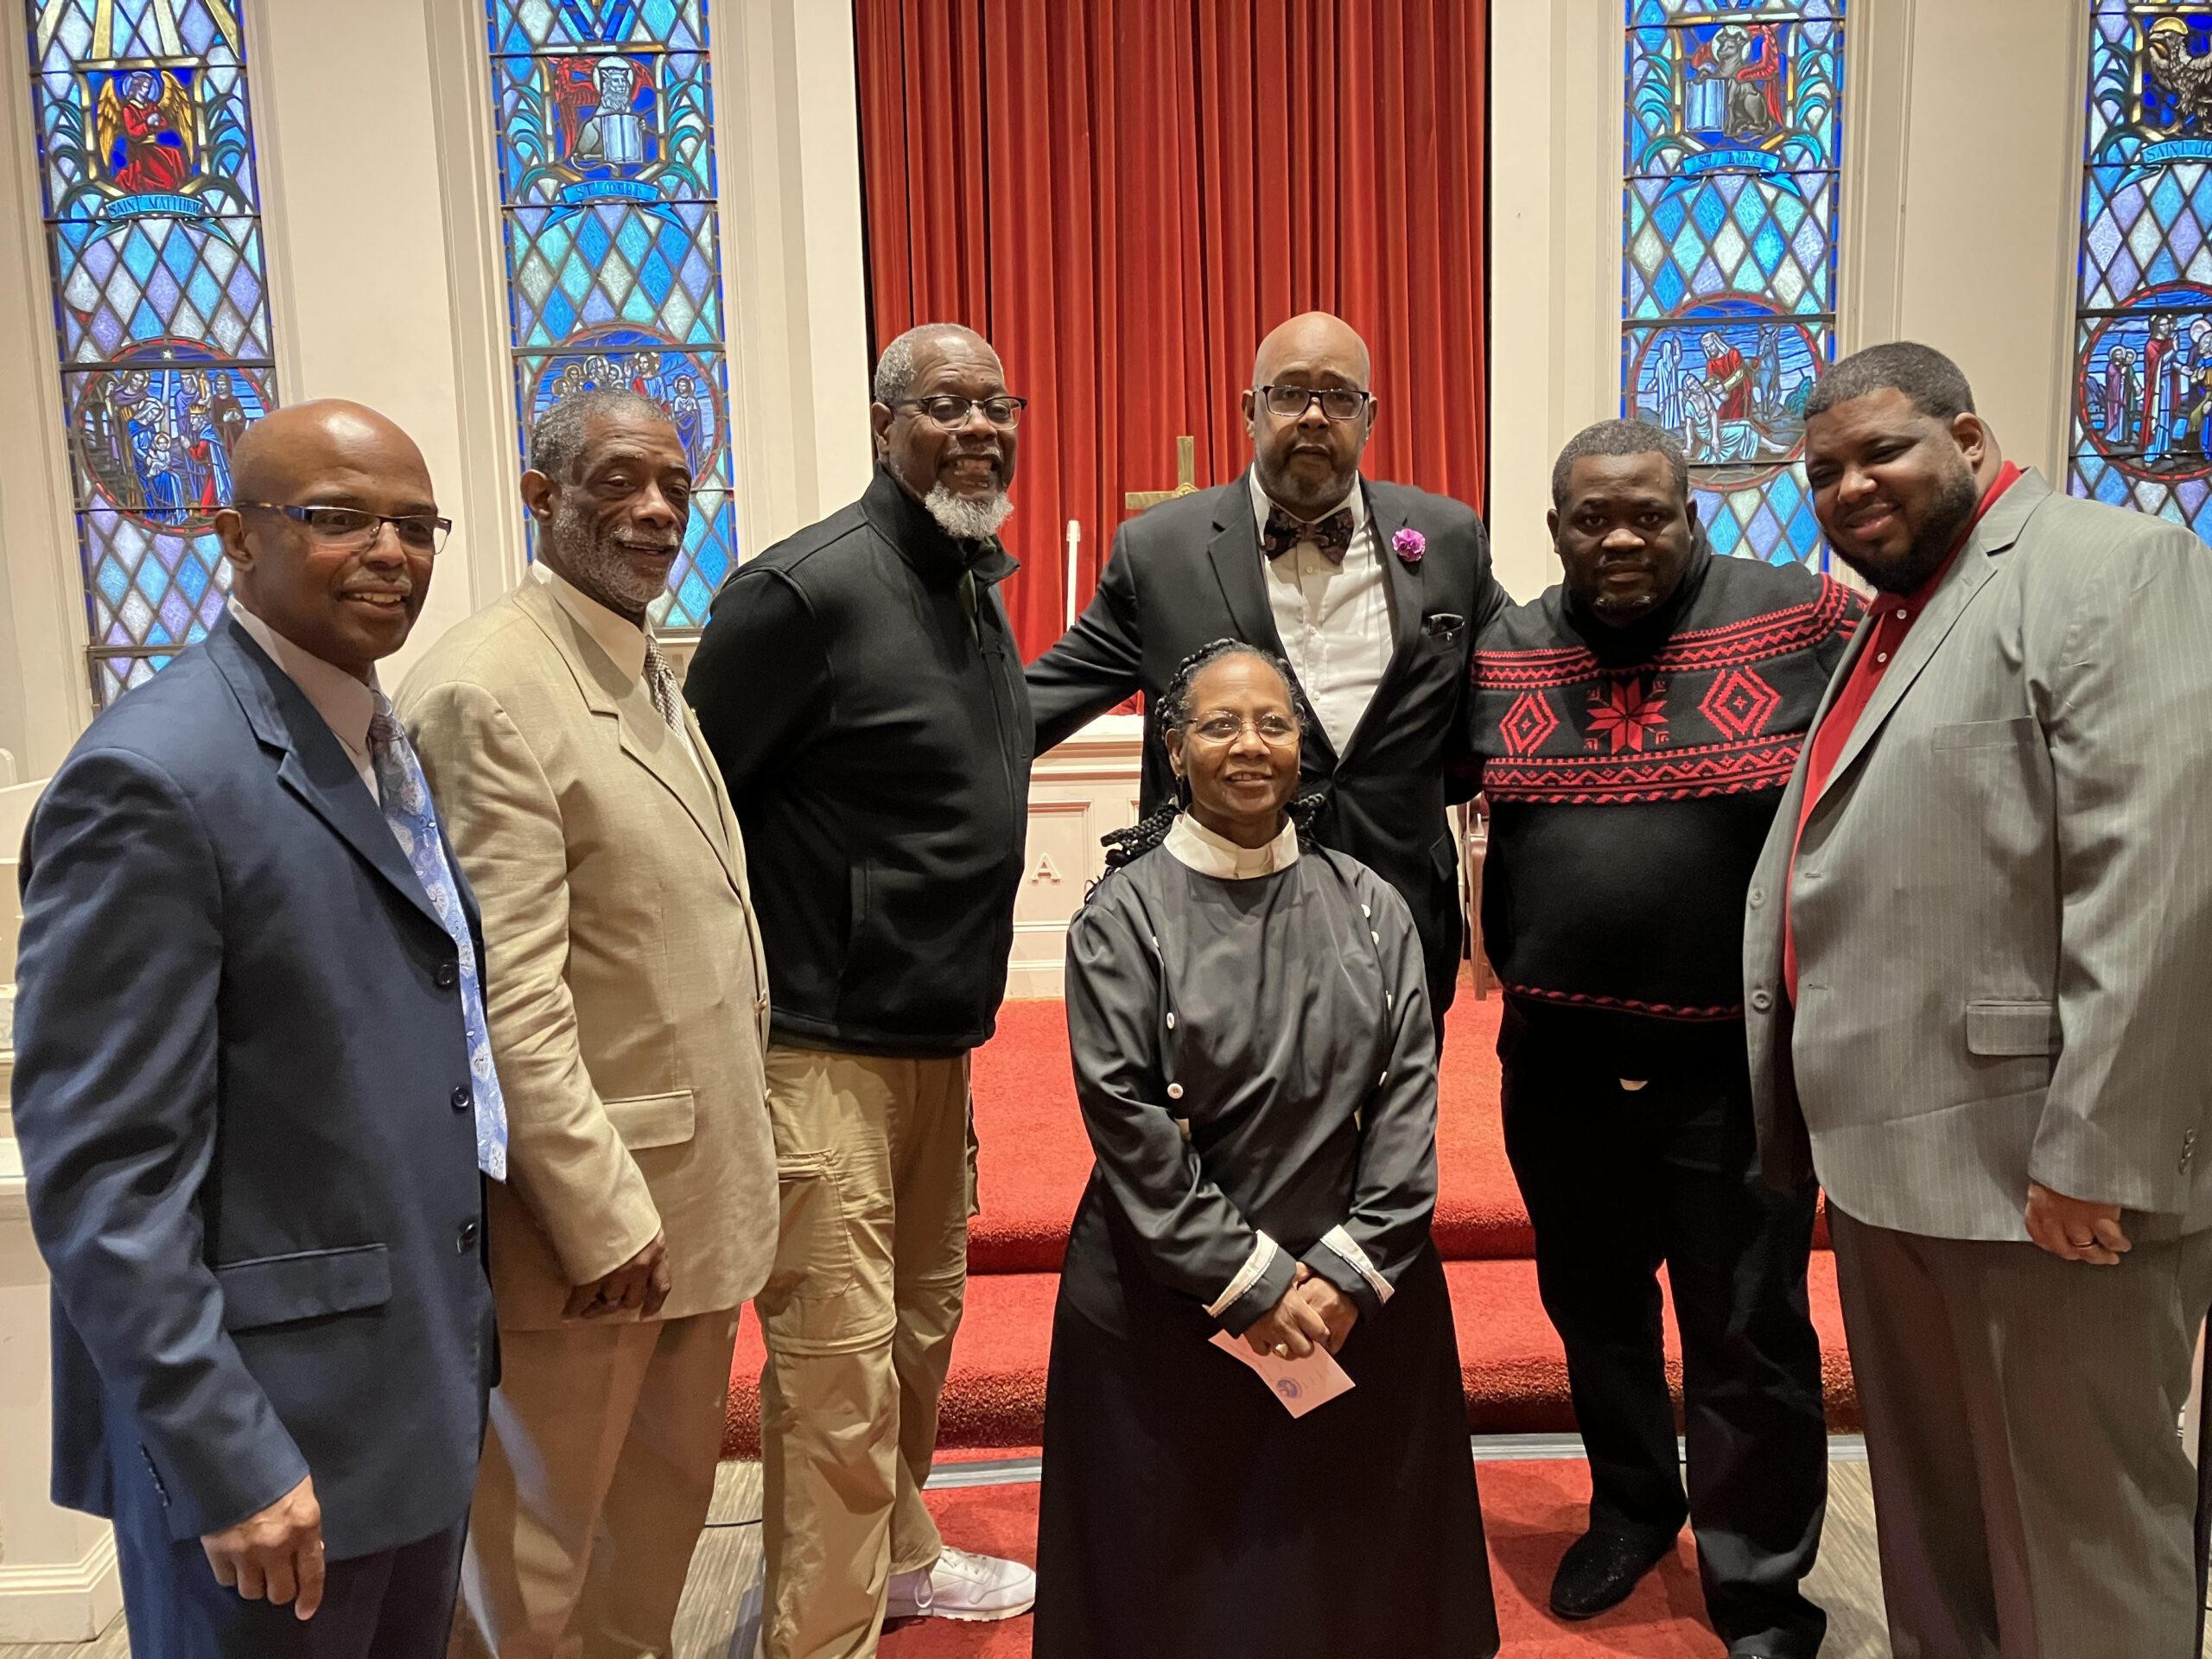 Black Ministers Mark Anniversary of Emancipation Proclamation On New Year's  Day - New Britain Progressive